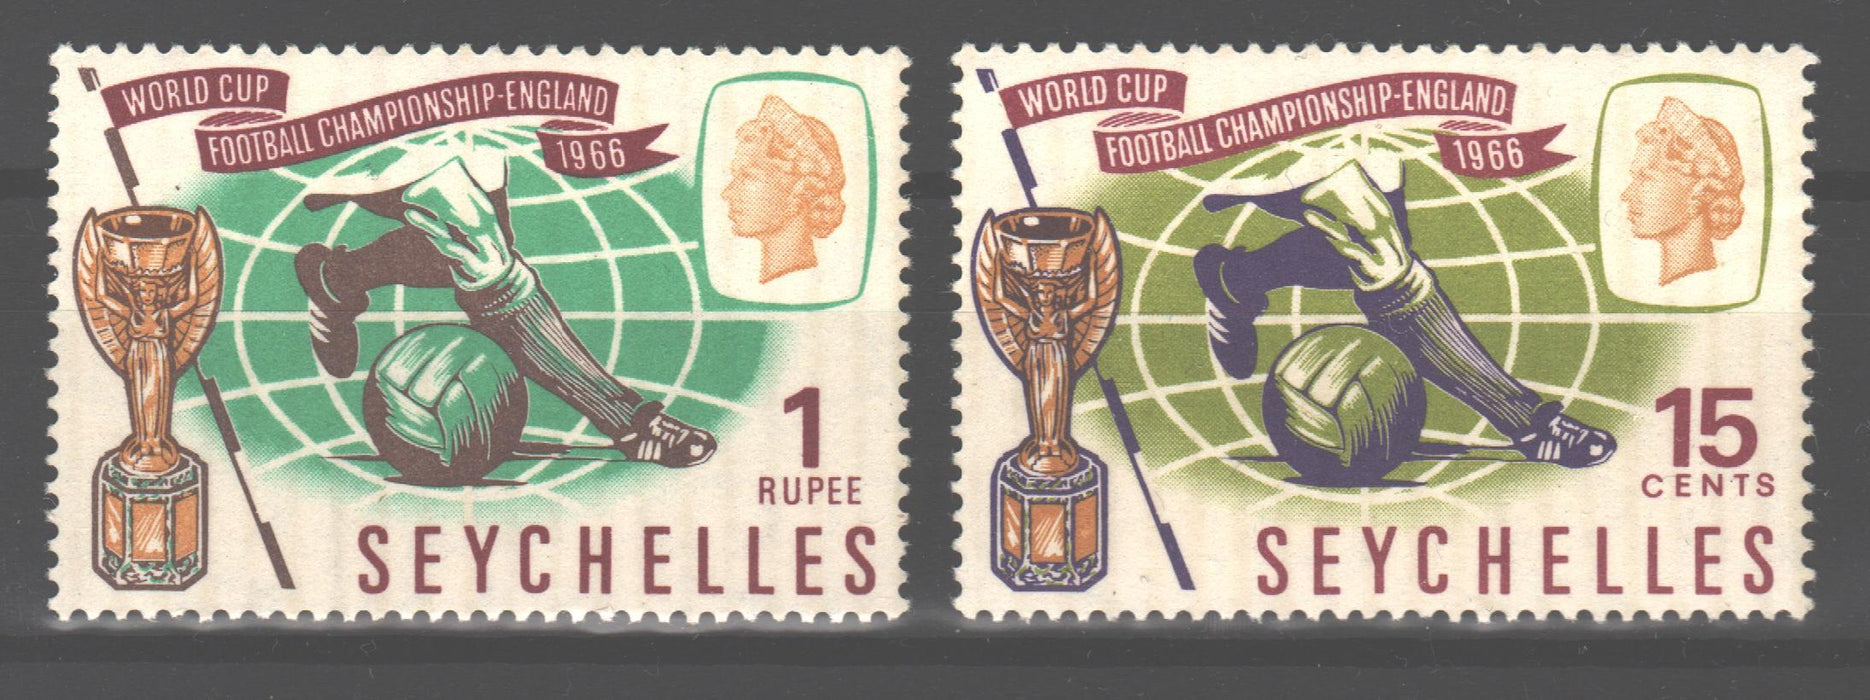 Seychelles 1966 World Cup Soccer Issue Scott #226-227 c.v. 0.95$ - (TIP A)-Stamps Mall